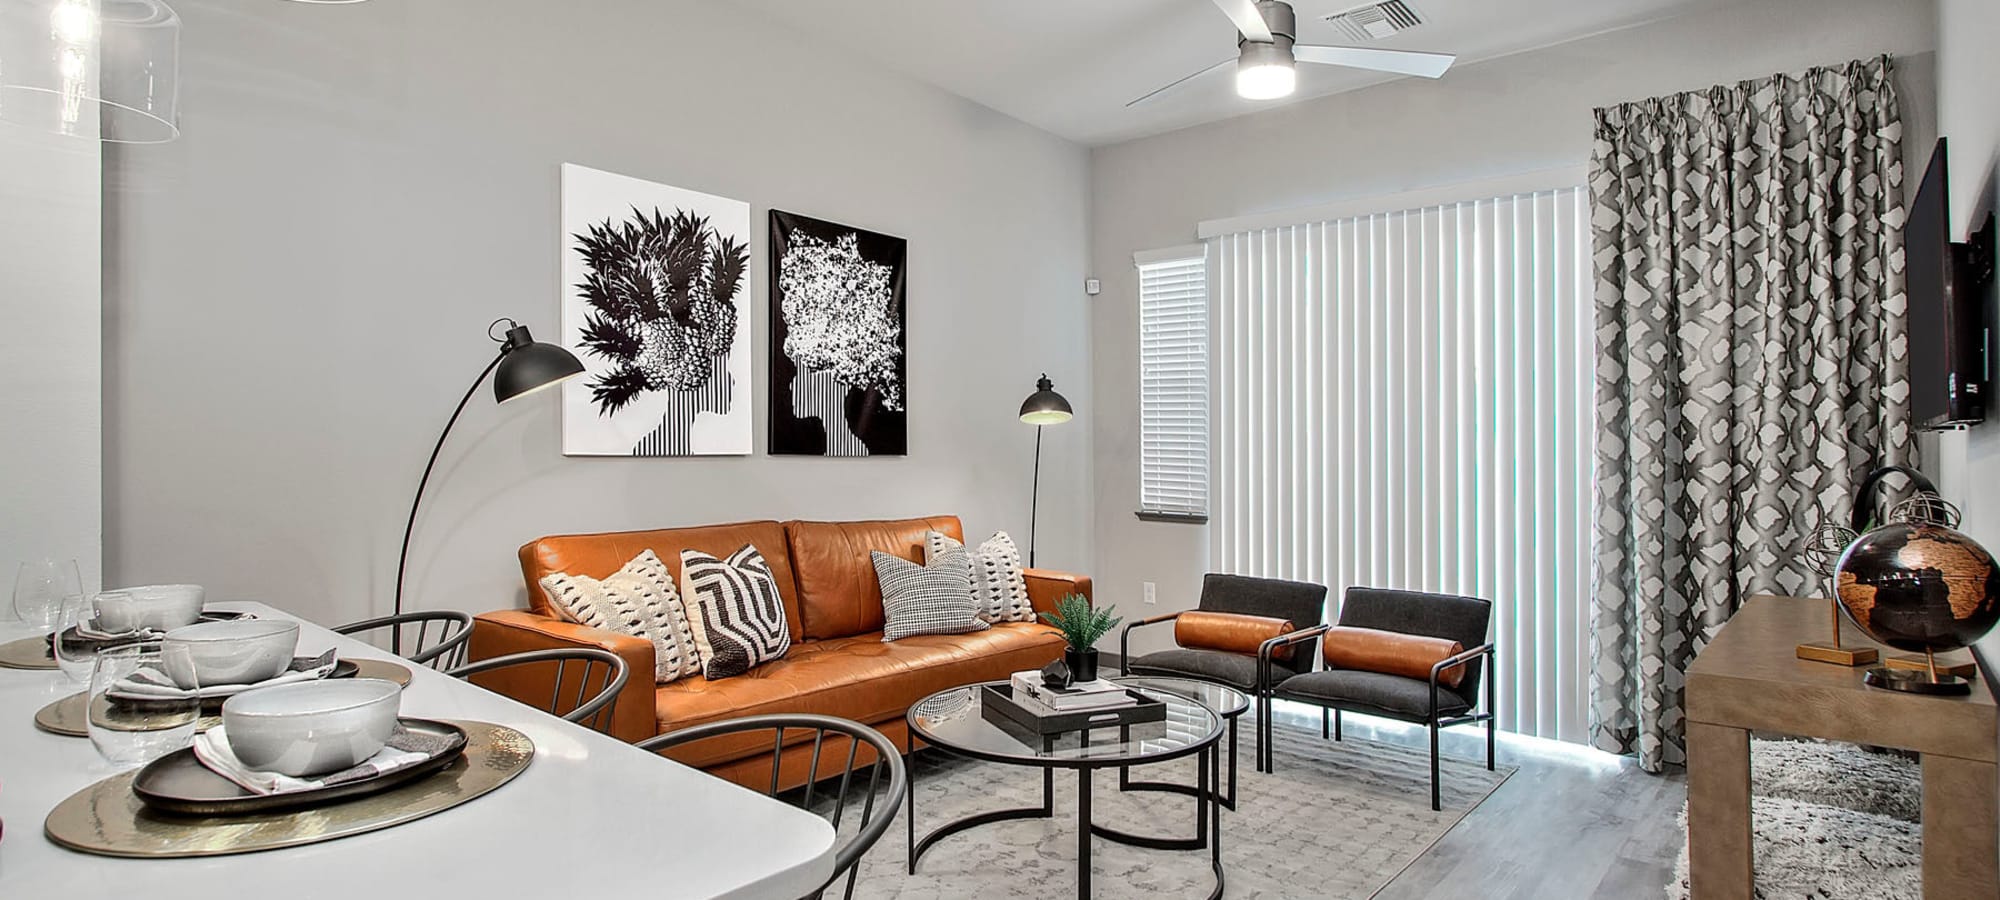 Ceiling fan and vertical blinds in the living space of a model home at Jade Apartments in Las Vegas, Nevada